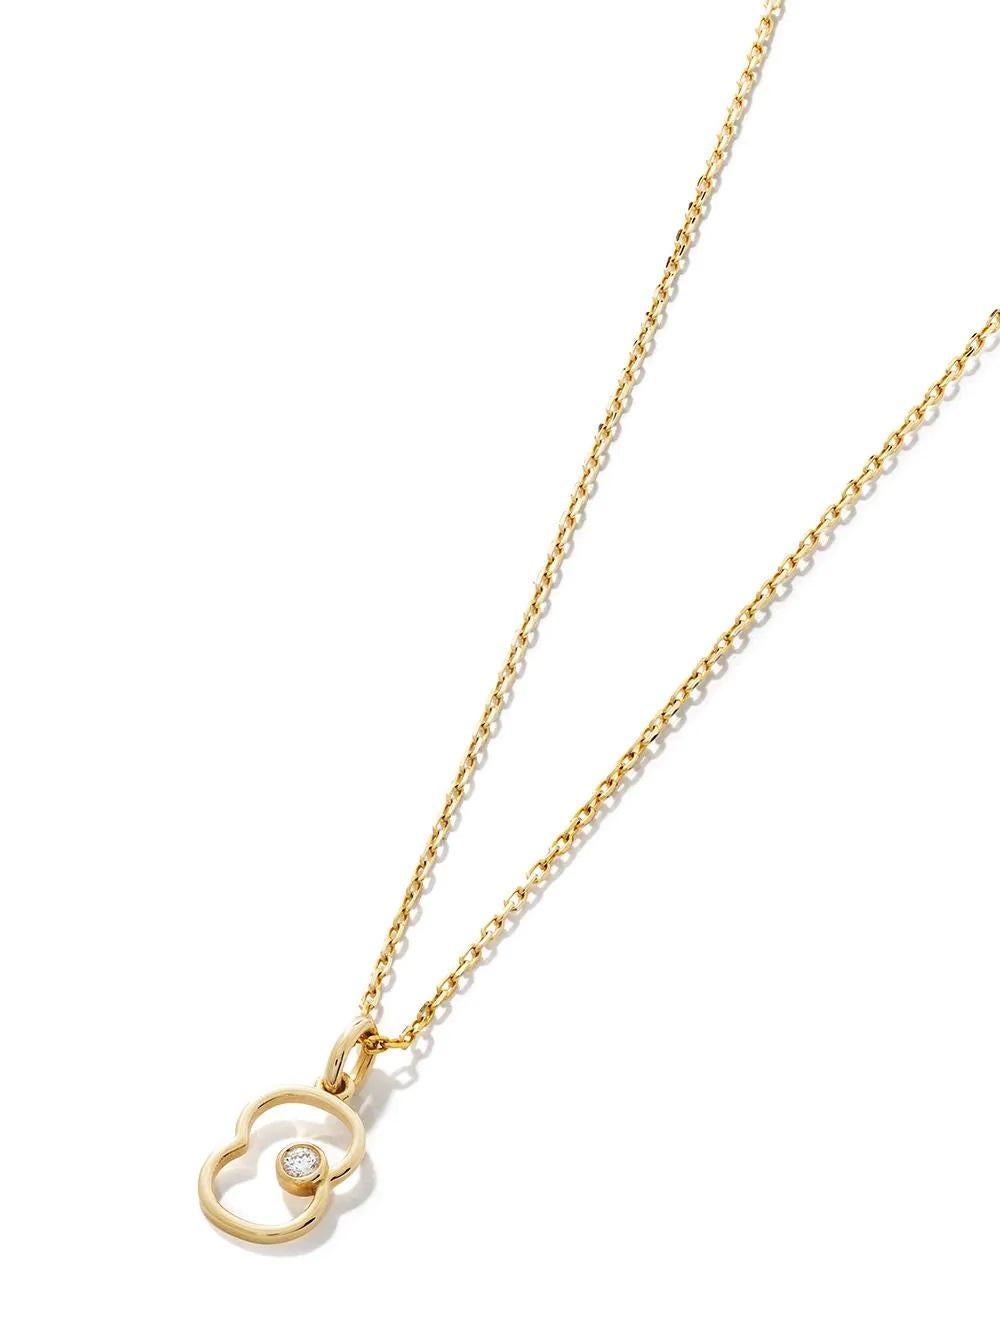 AS29
14kt yellow gold diamond Eight necklace
If eight is your lucky number, this is your lucky day. Boasting a 14kt yellow gold construction and adorned with a diamond, this Eight necklace from AS29 will bring you nothing but good vibes. Make your